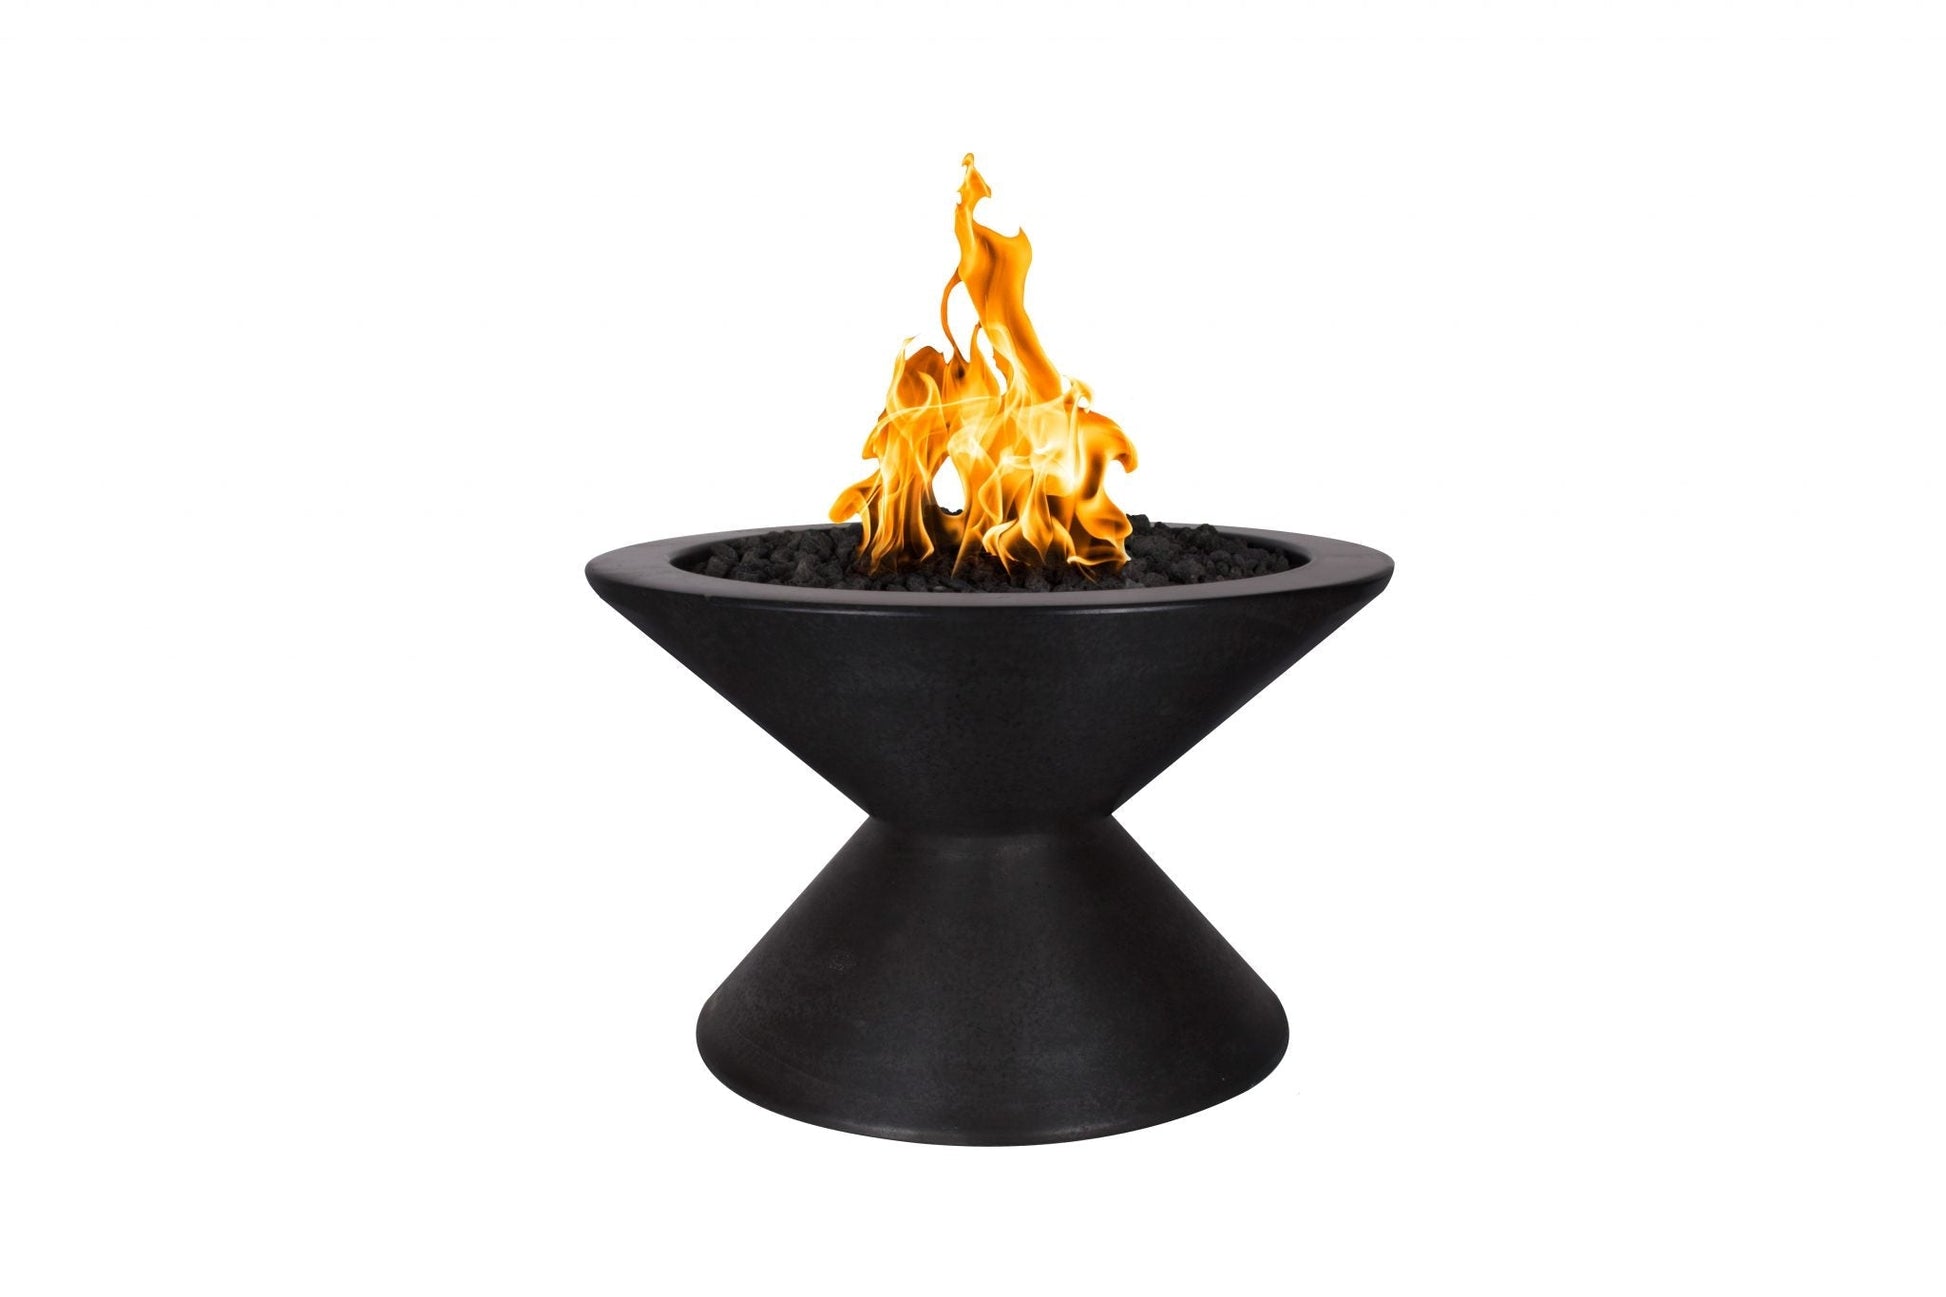 The Outdoor Plus Round Lucia 31" White GFRC Concrete Liquid Propane Fire Pit with 110V Electronic Ignition